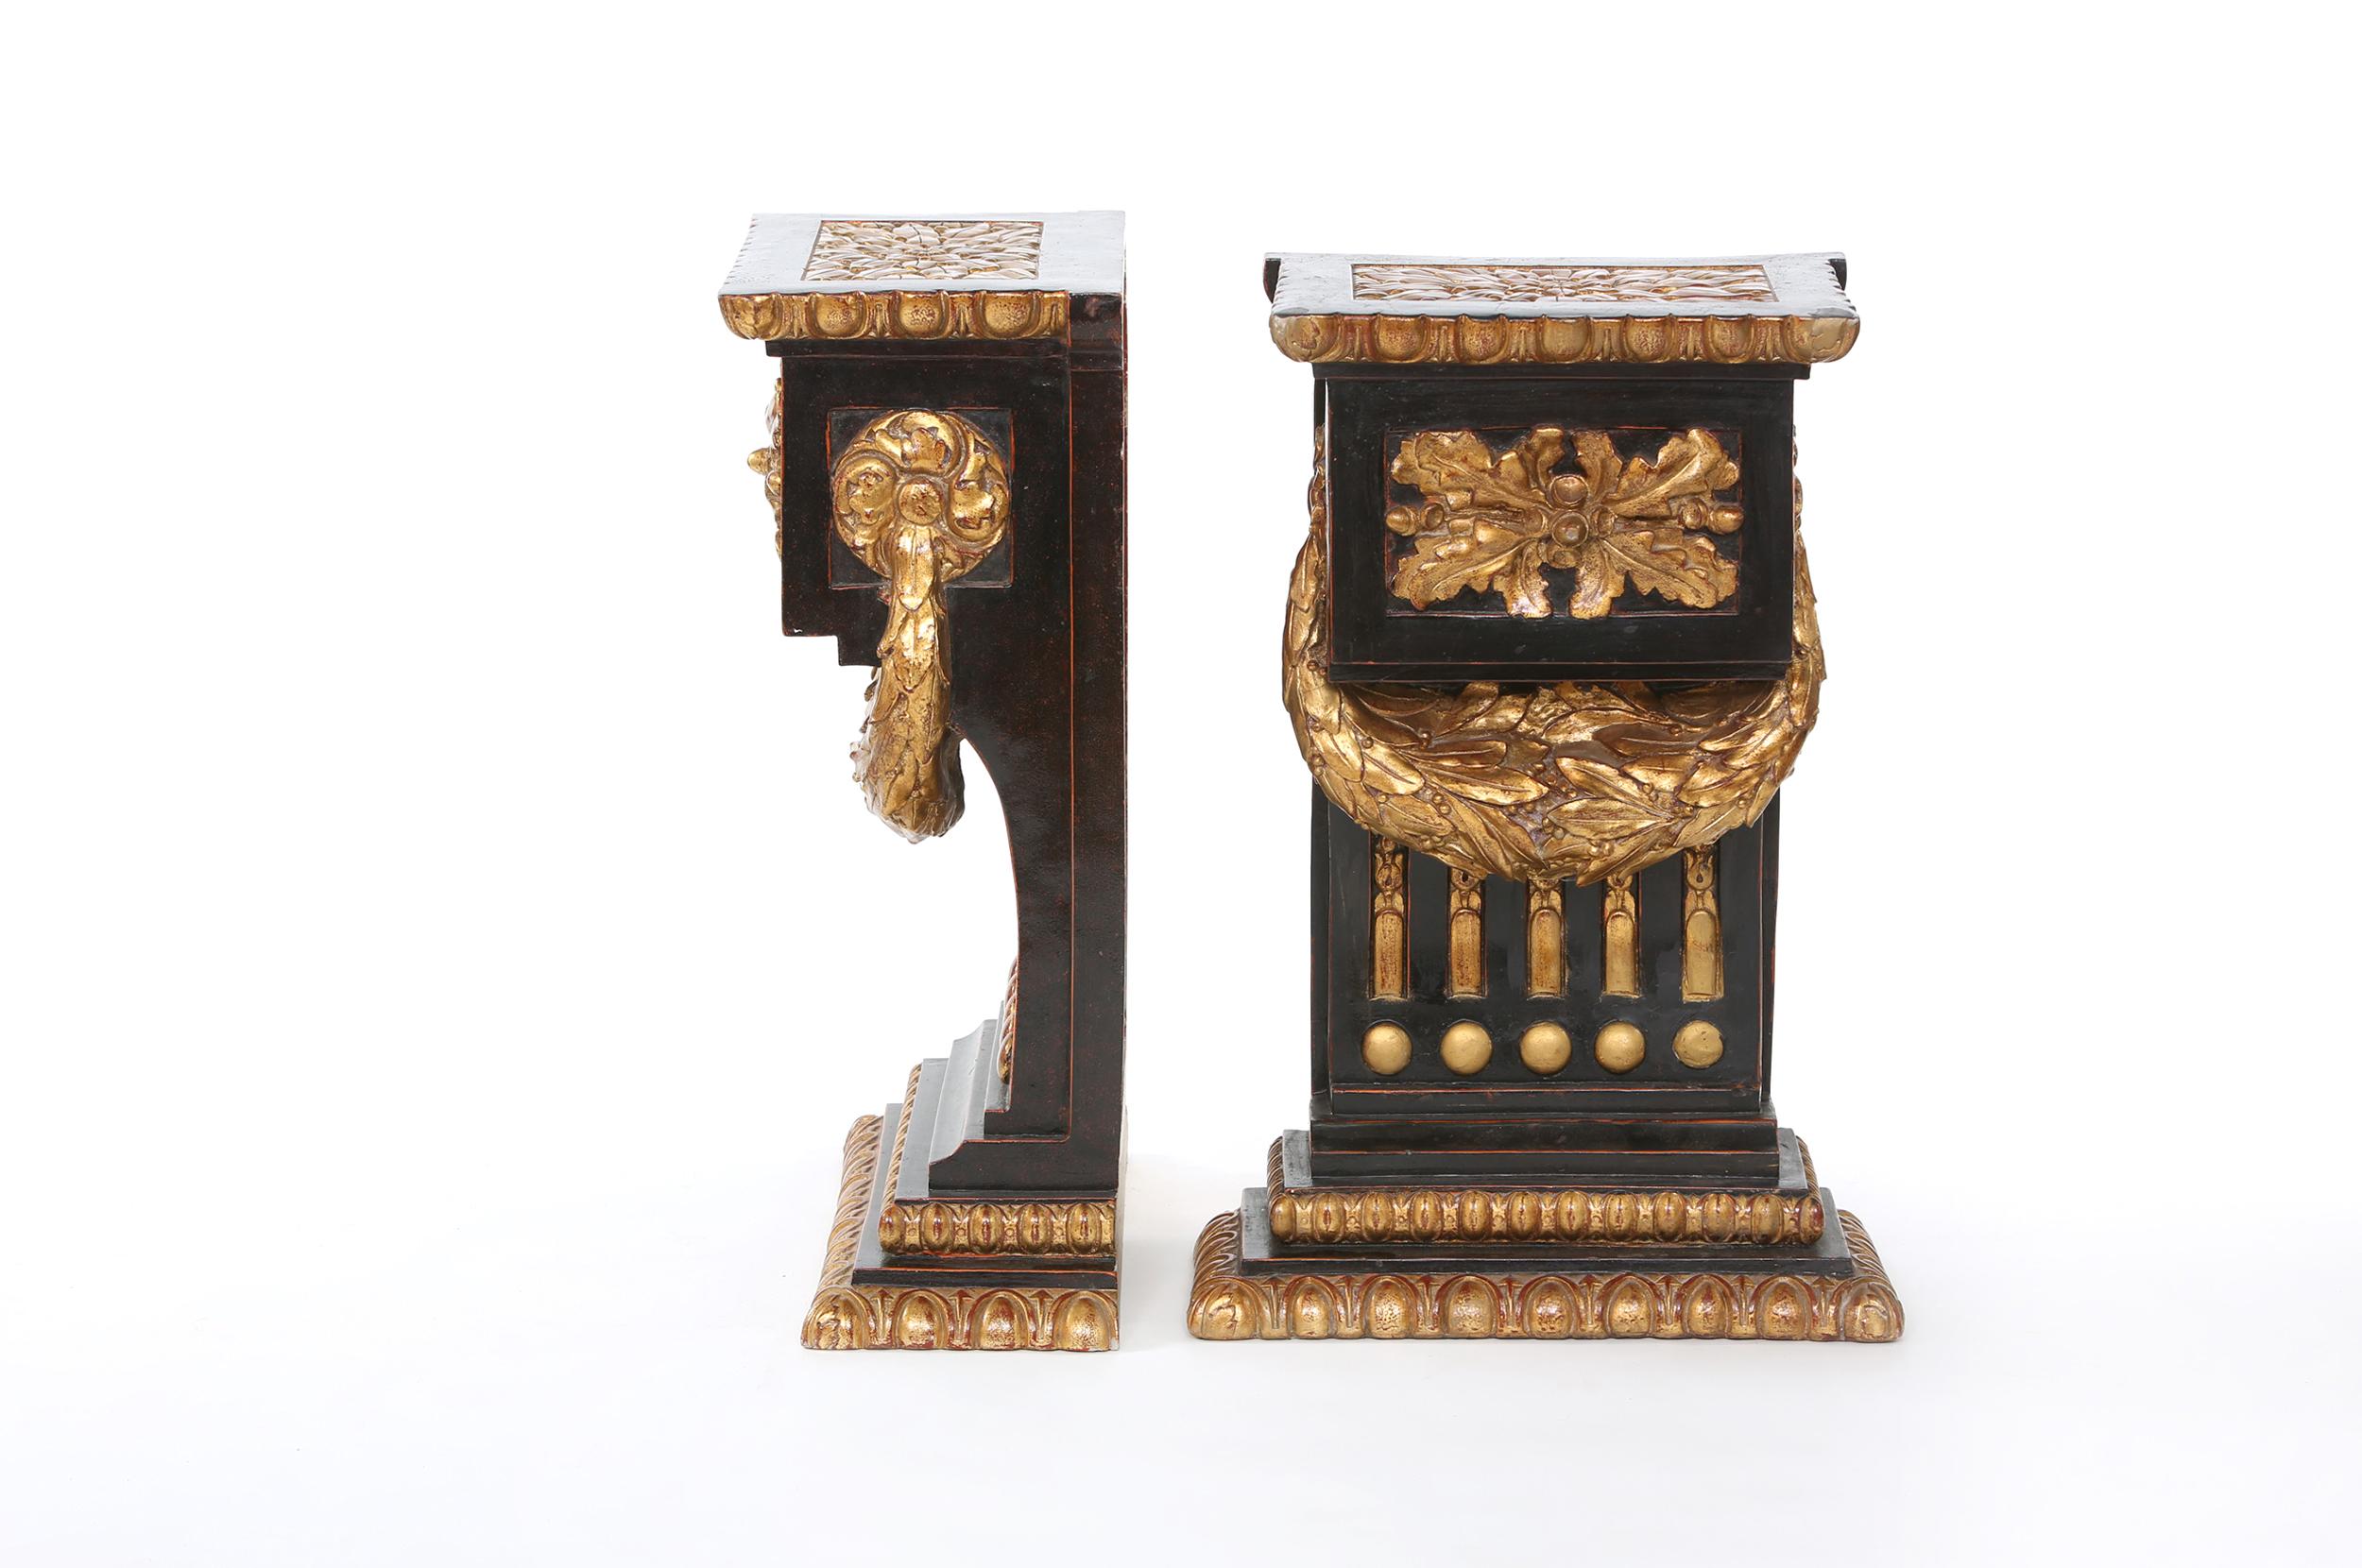 Mid-20th century pair of gilt gold and paint decorative bronze pedestal / side tables with exterior design details. Each table is in good condition. Minor wear consistent with age / use. Each table end / pedestal stand about 31 inches tall x 17.5